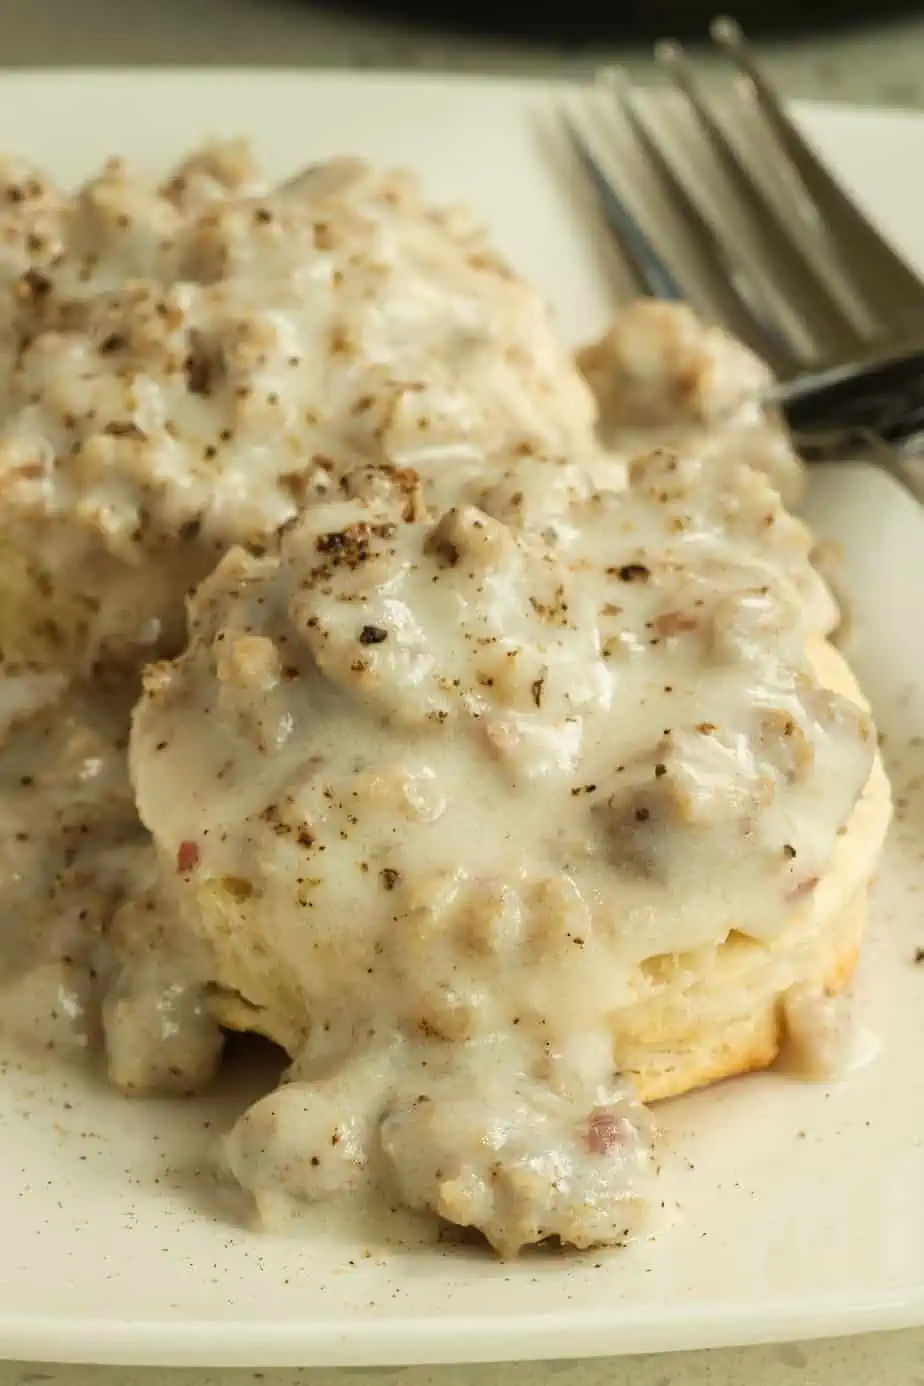 A delicious plate of biscuits and gravy made with ground sausage.